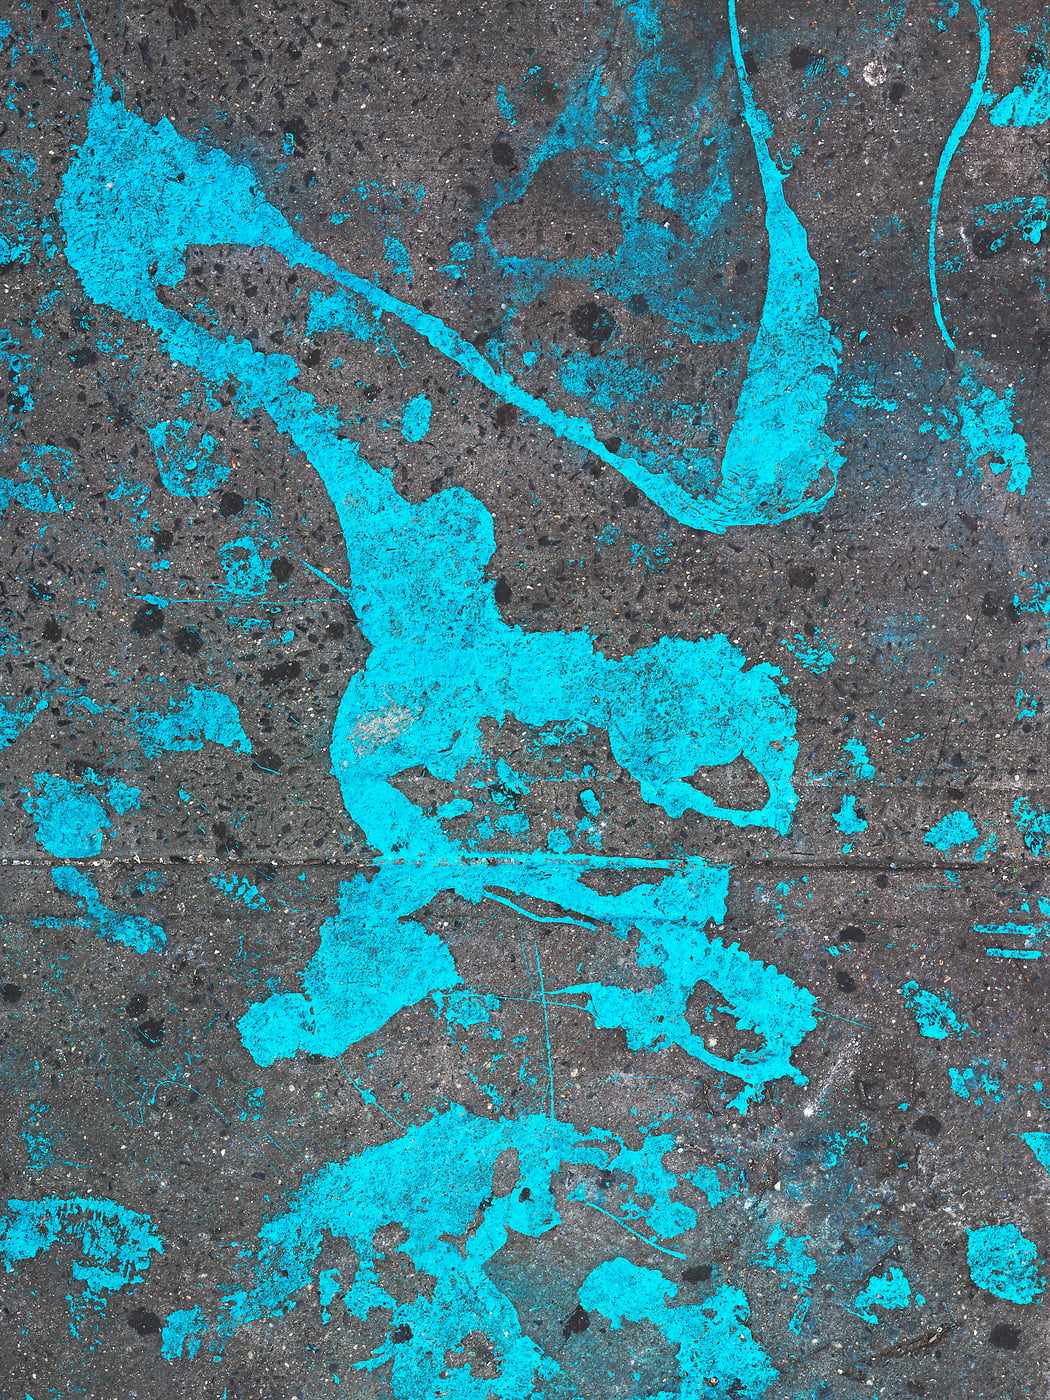 491 megapixels! A very high resolution, large-format VAST photo print of paint on the New York City Sidewalk; artistic abstract photograph created by Dan Piech in the Lower East Side neighborhood of Manhattan, New York City